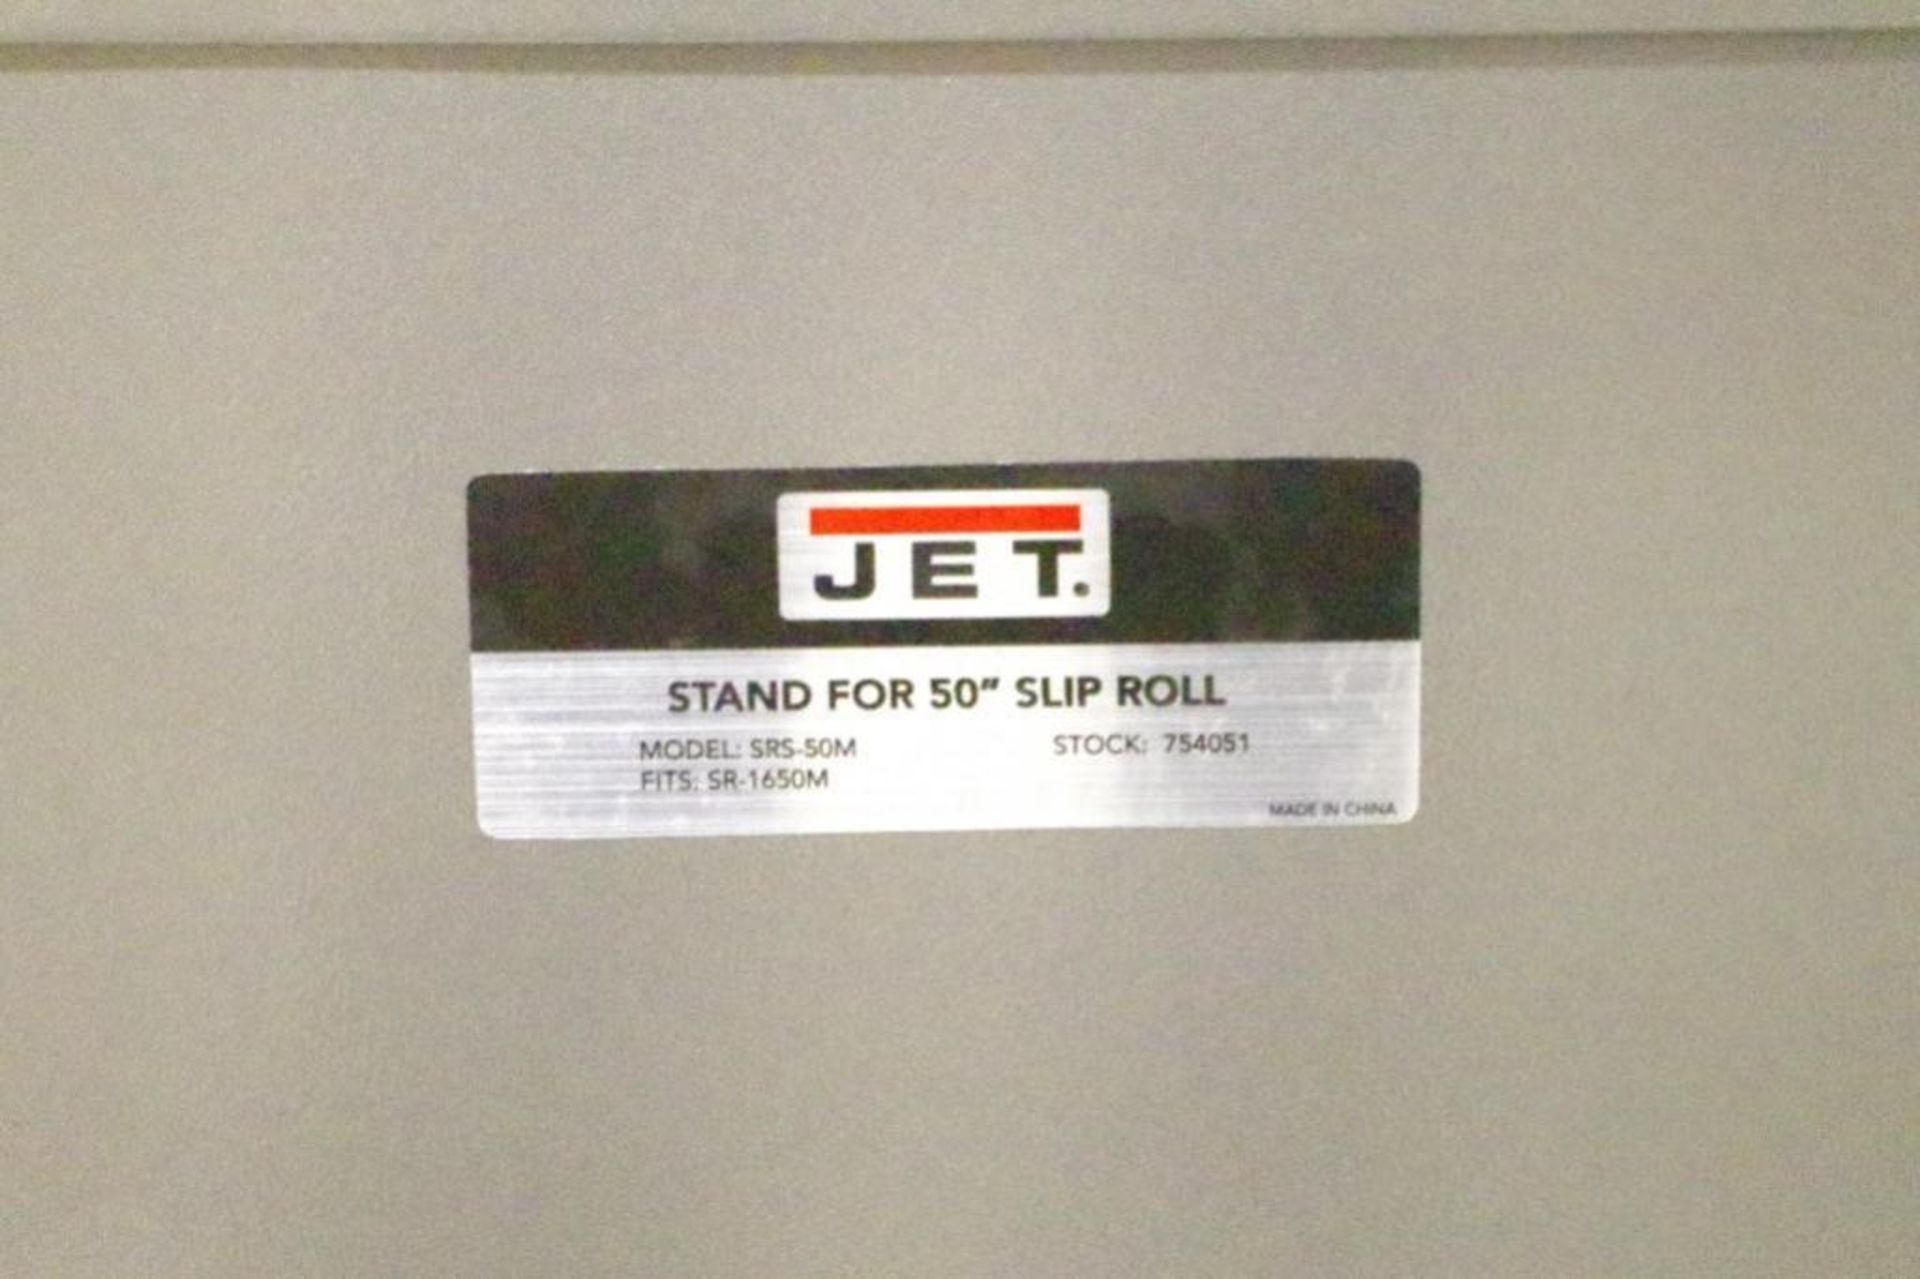 JET Tool Stand for 50" Slip Roll, 15" x 57-1/2" x 27-1/2"H, M/N SRS-50M - Image 3 of 3